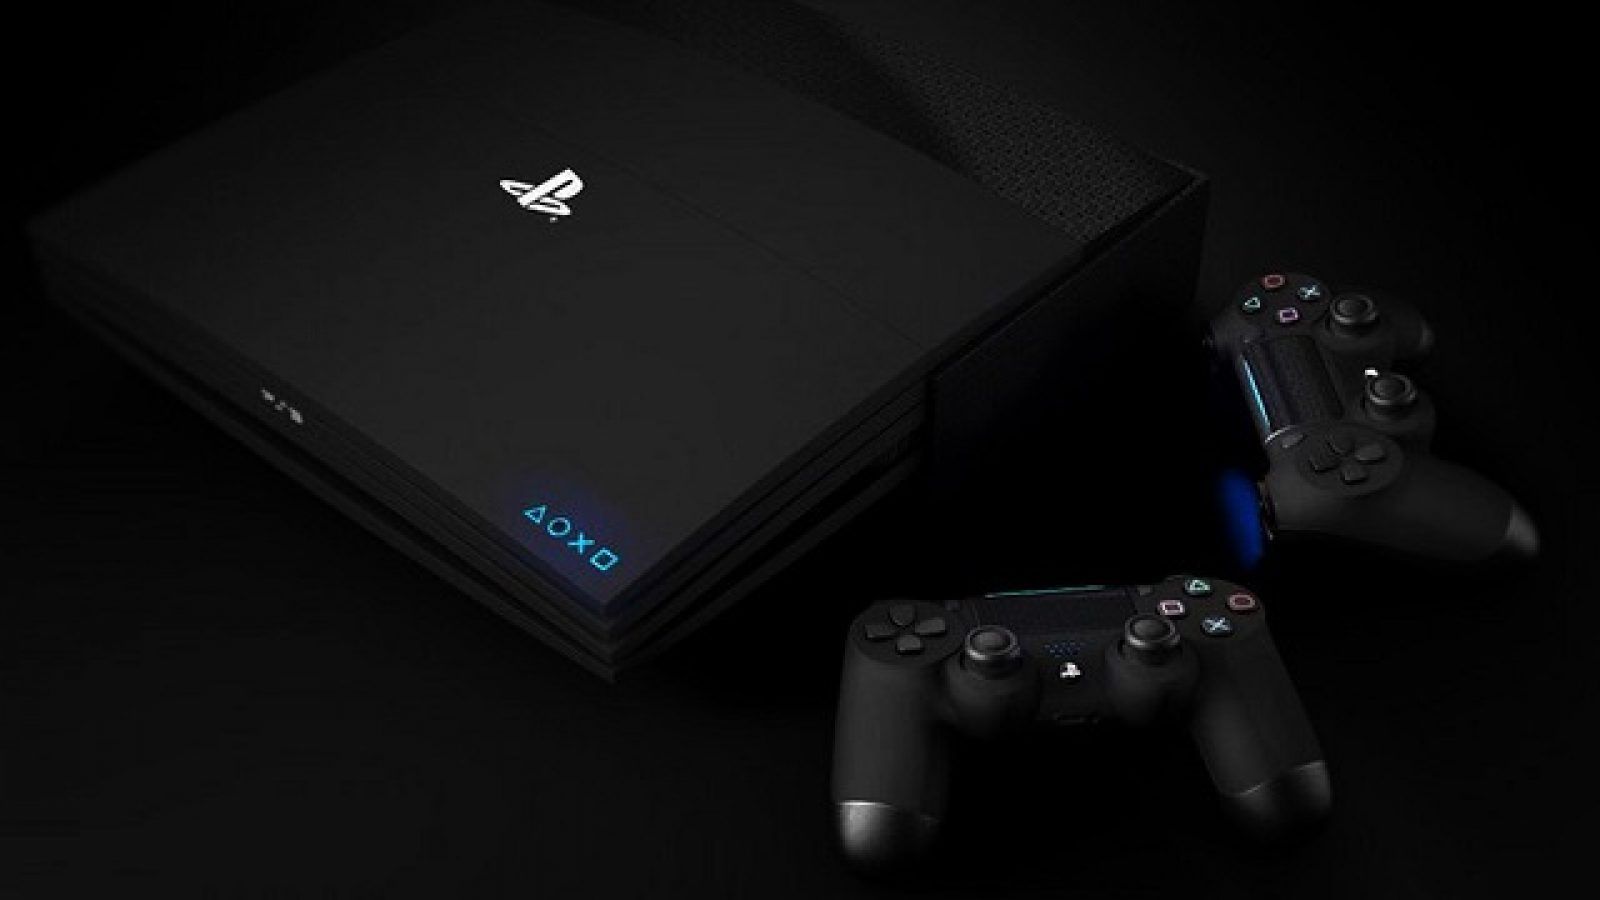 Are Sony beginning to drop hints about the PS5 release date?